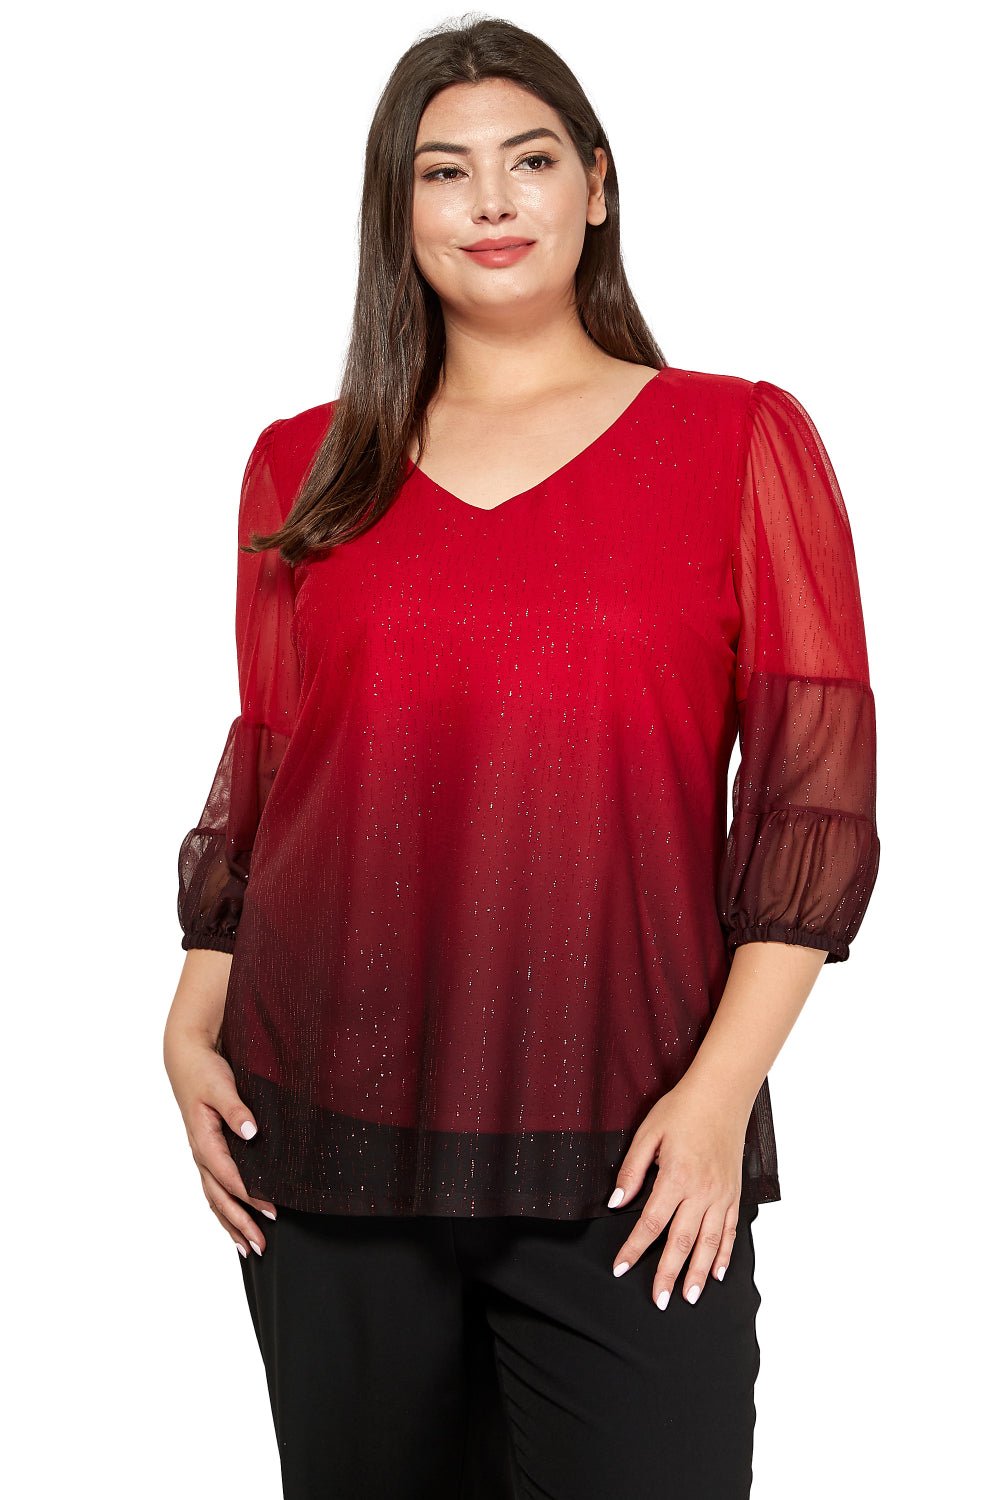 Sara Michelle Double Bubble Sleeve V-Neck Blouse with Cutout Back Detail and Lining - PLUS - DressbarnShirts & Blouses